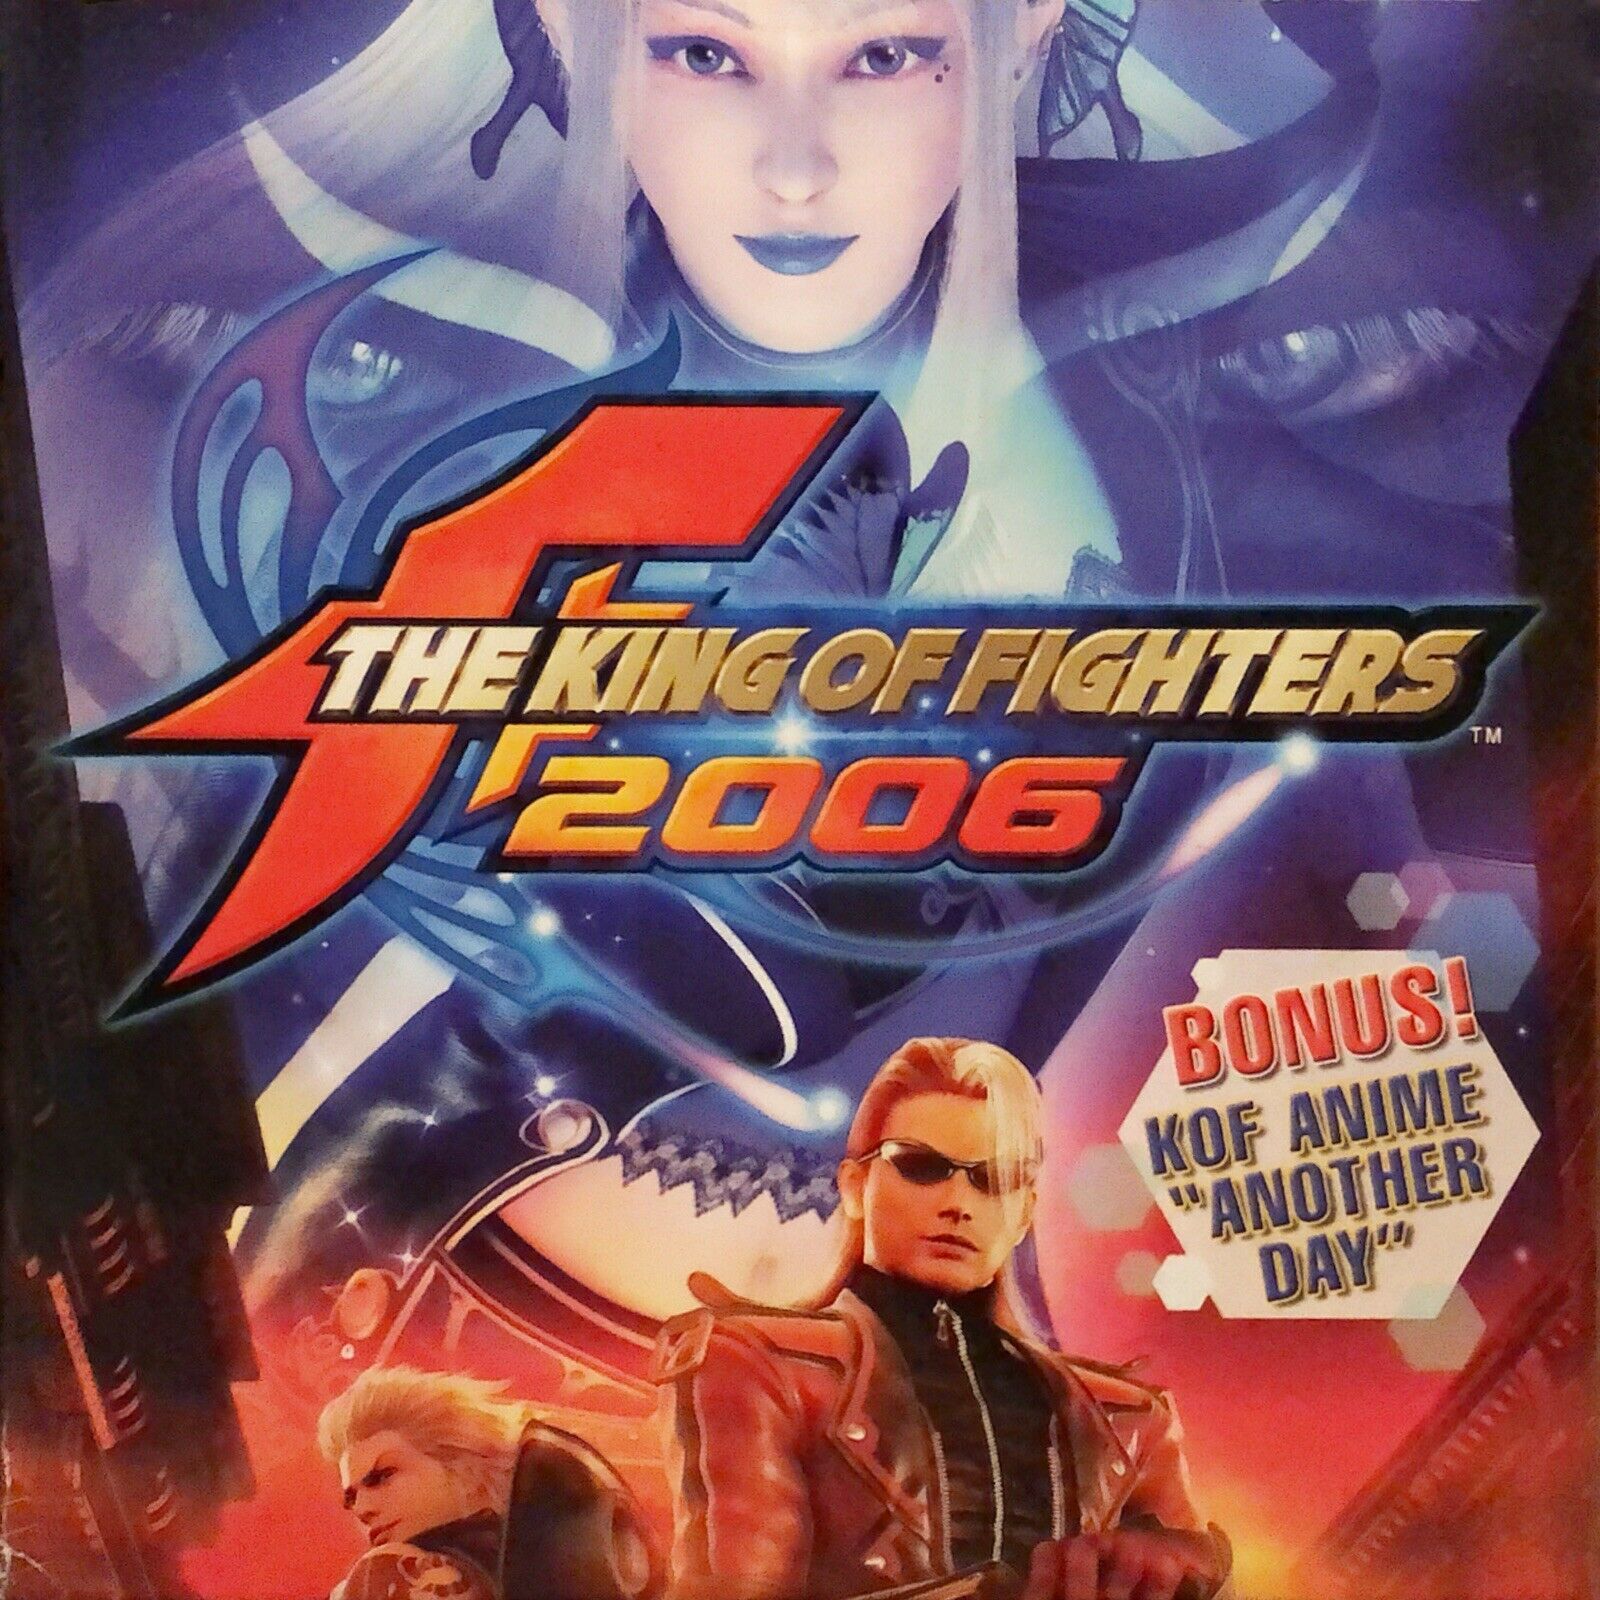 The King Of Fighters - Movie DVD Scanned Covers - The King Of Fighters -  English f :: DVD Covers